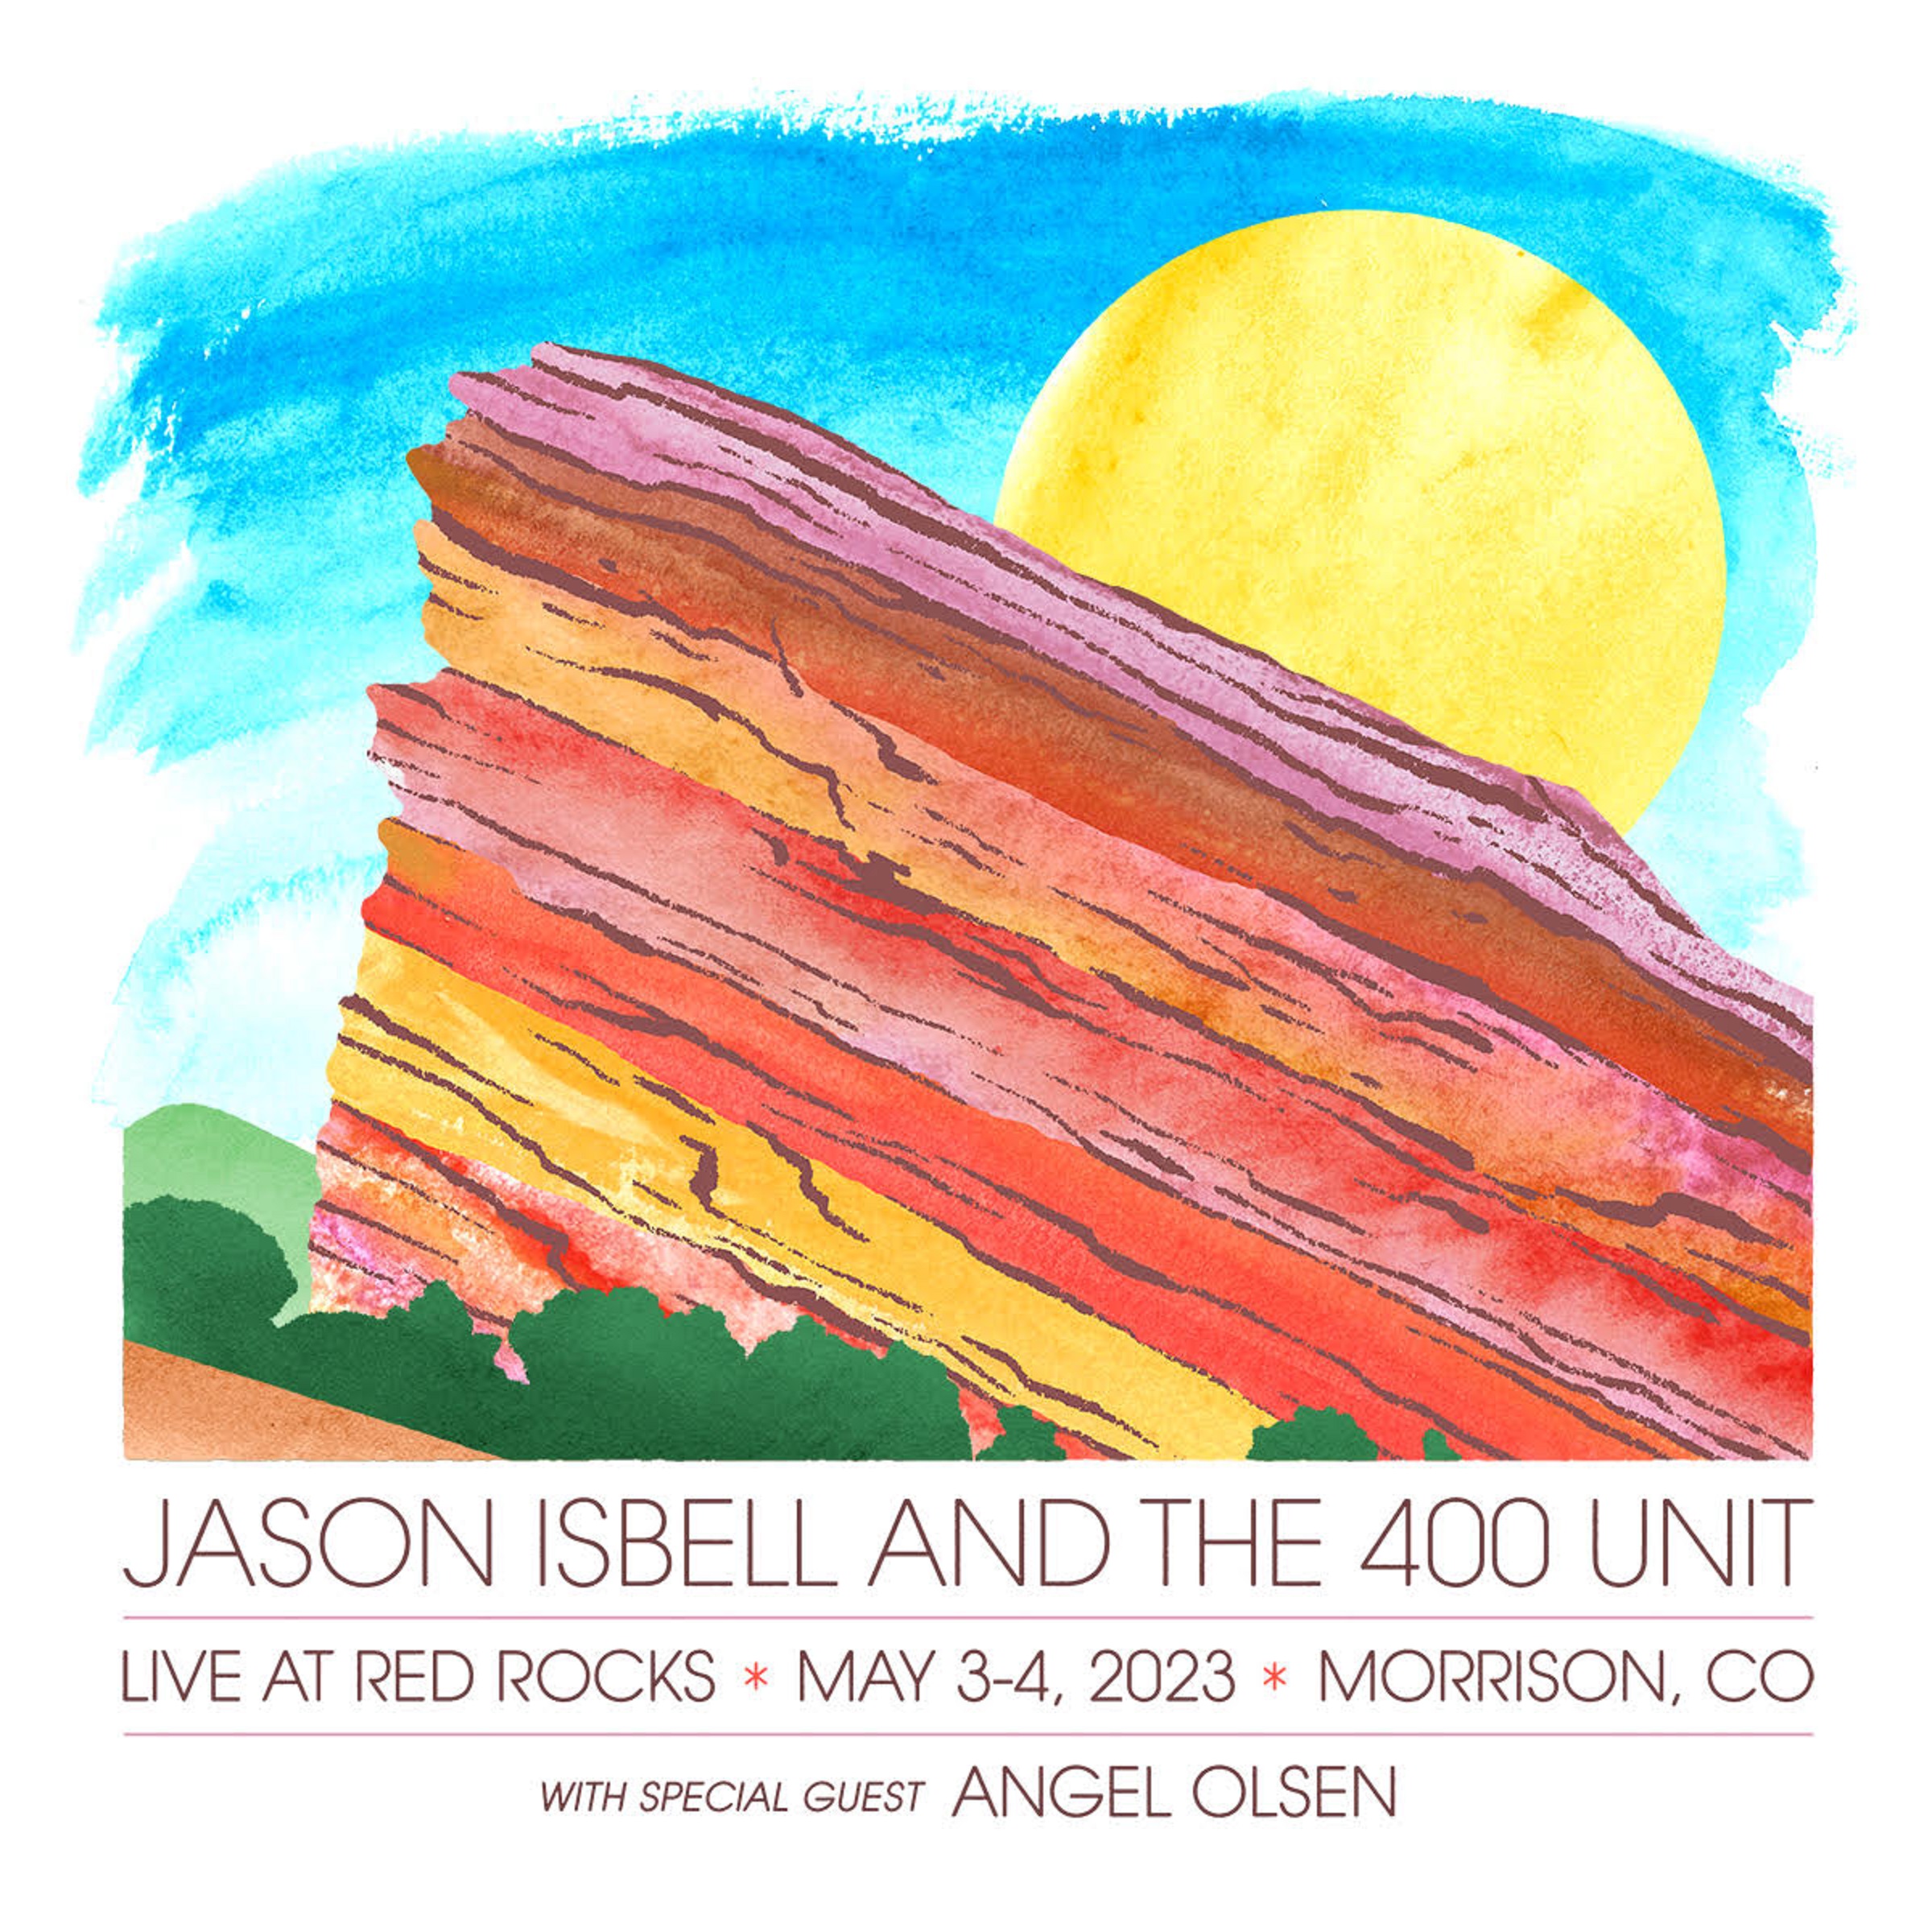 JASON ISBELL AND THE 400 UNIT Announce 2023 Red Rocks Shows